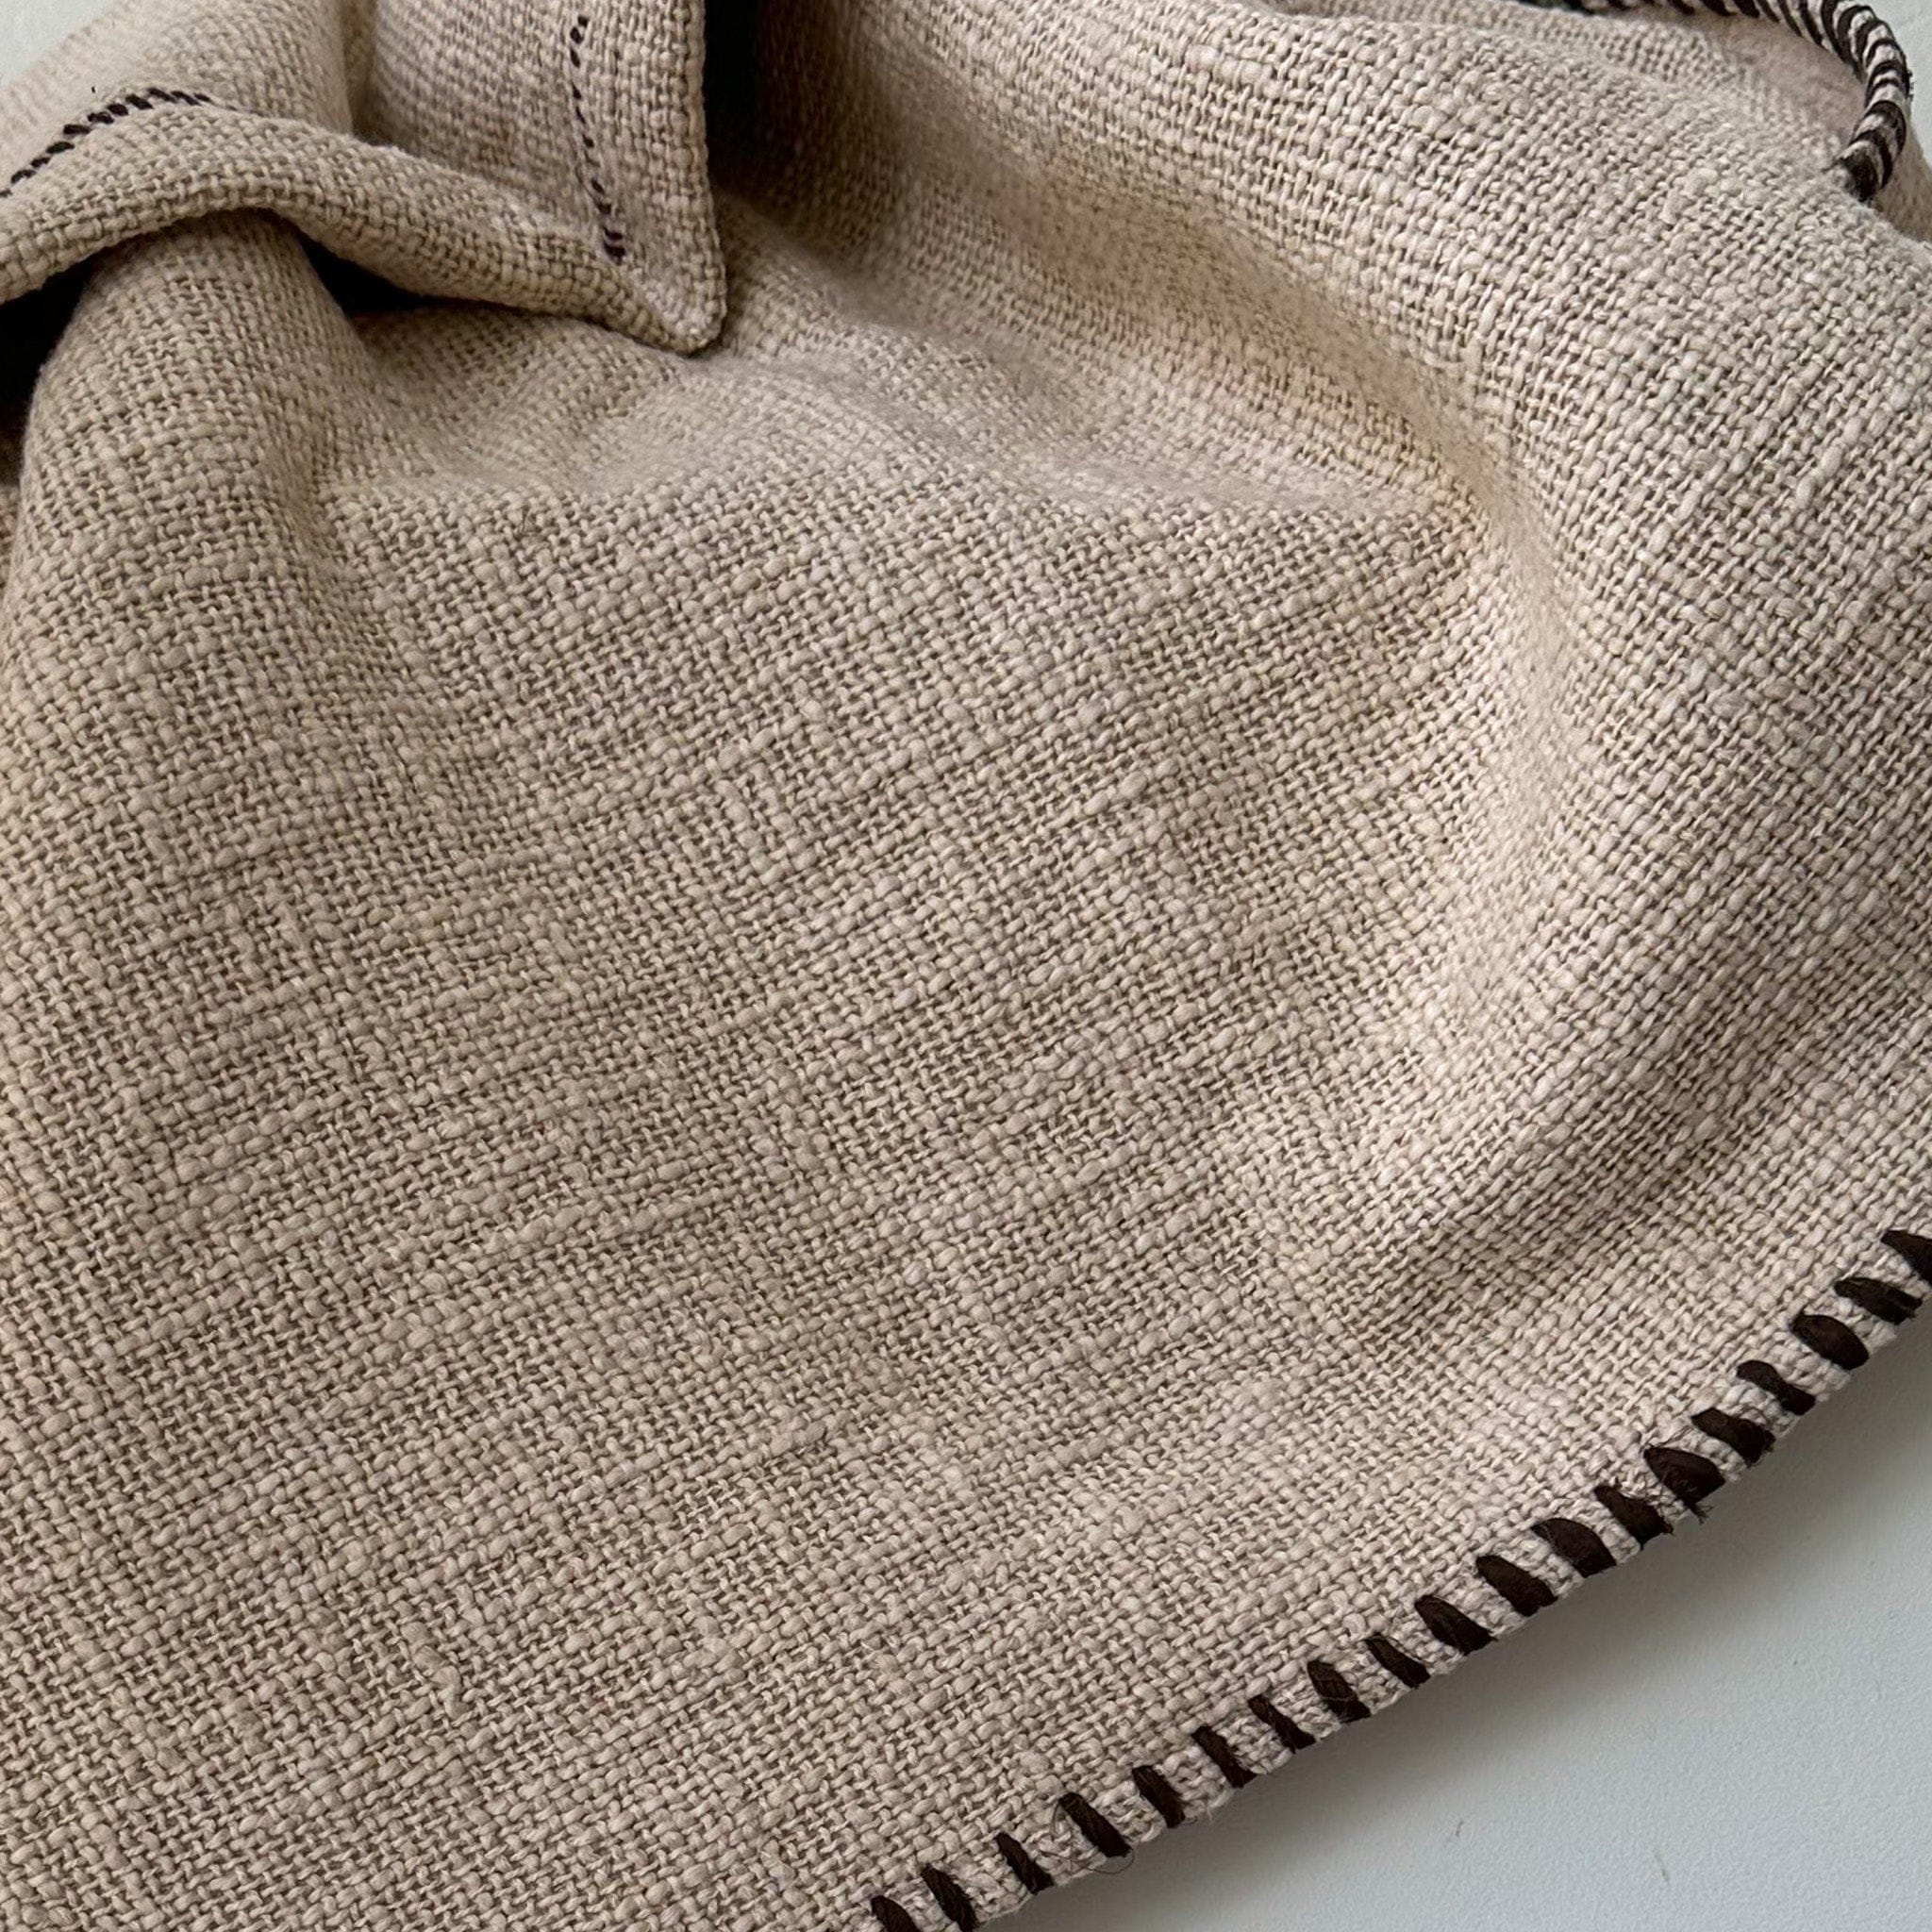 Neem Linens & Bedding Altai Blanket in Burnt Natural 84 x 84 by Neem